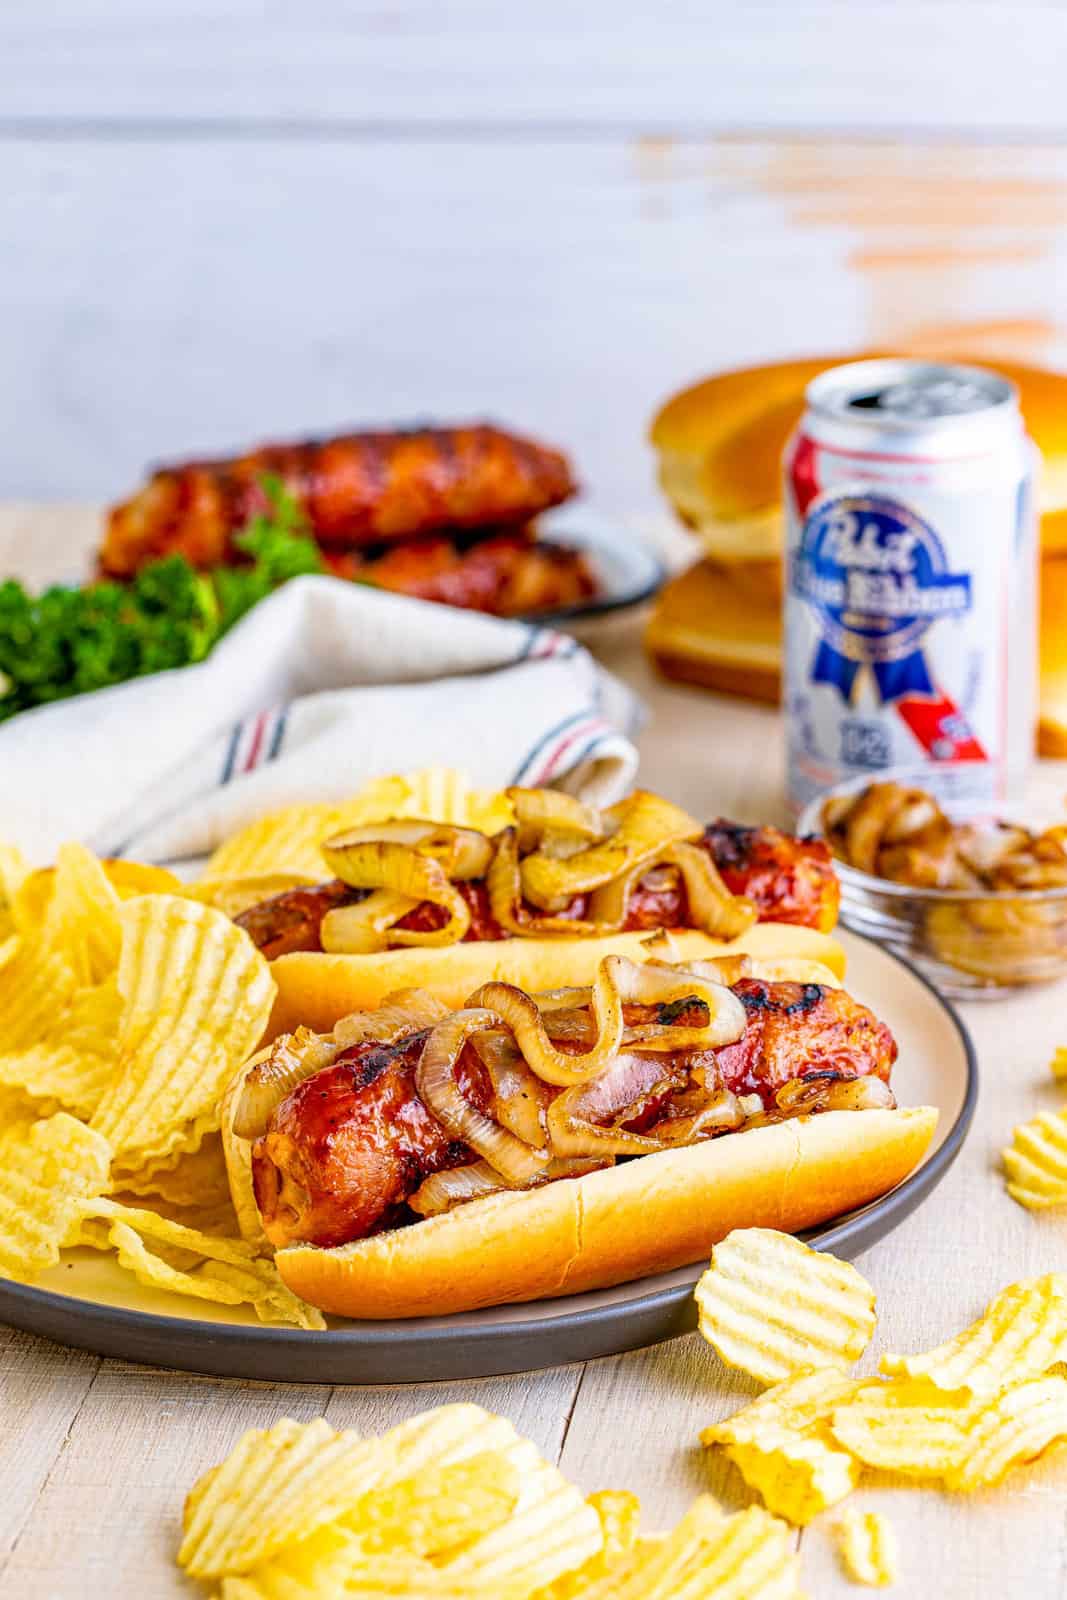 Cheese Stuffed Bacon Wrapped Brats on plate with beer and chips in back and around plate.